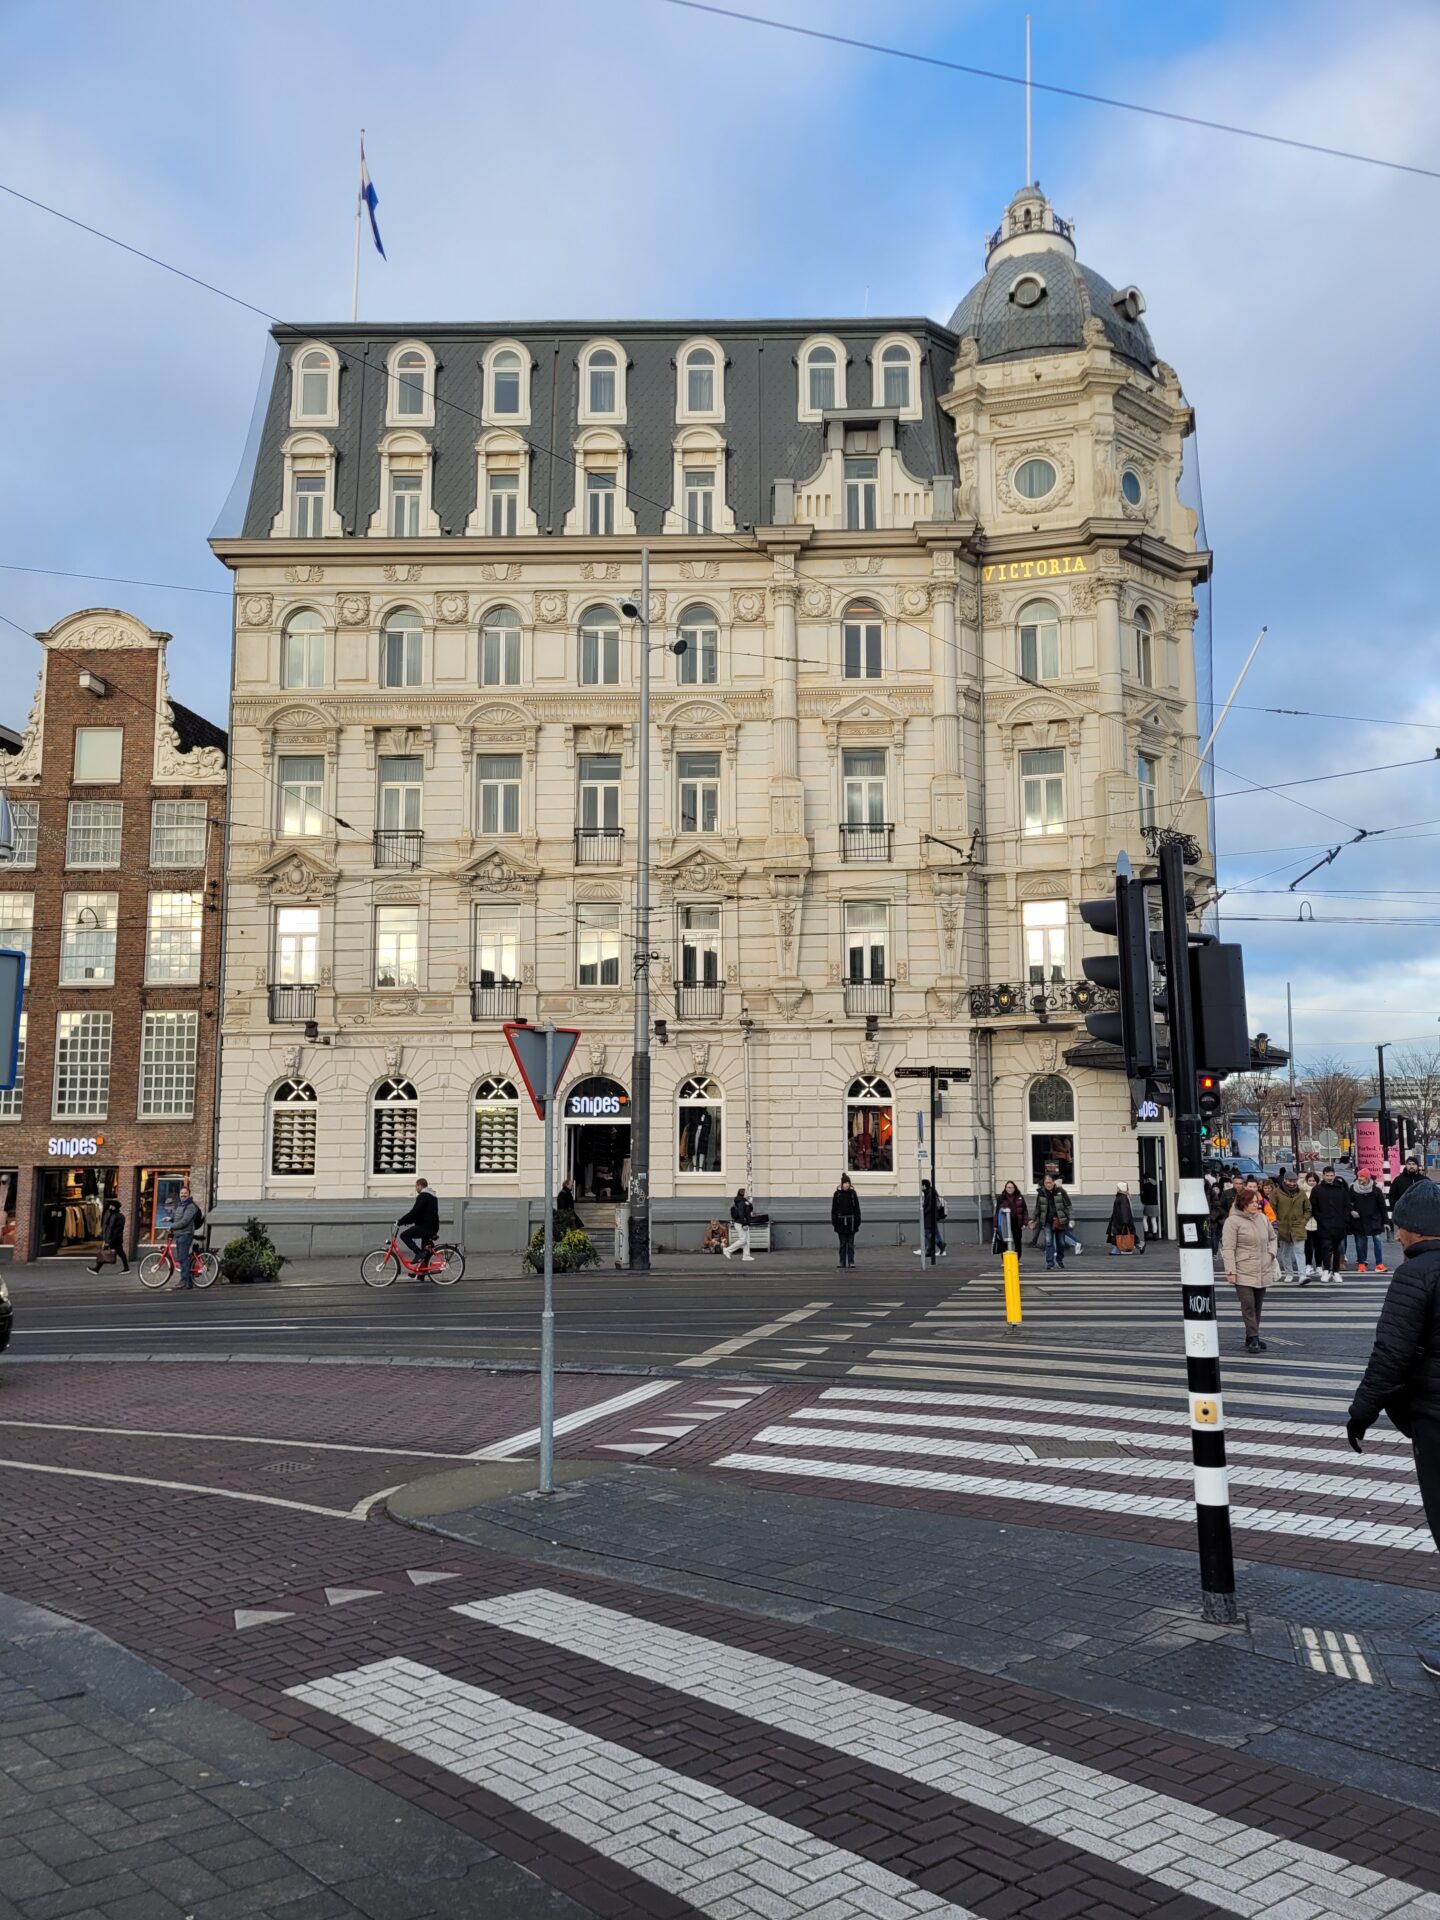 The Park Plaza Victoria Amsterdam is a beautiful historic hotel, perfectly located right across from Amsterdam Centraal Station. 